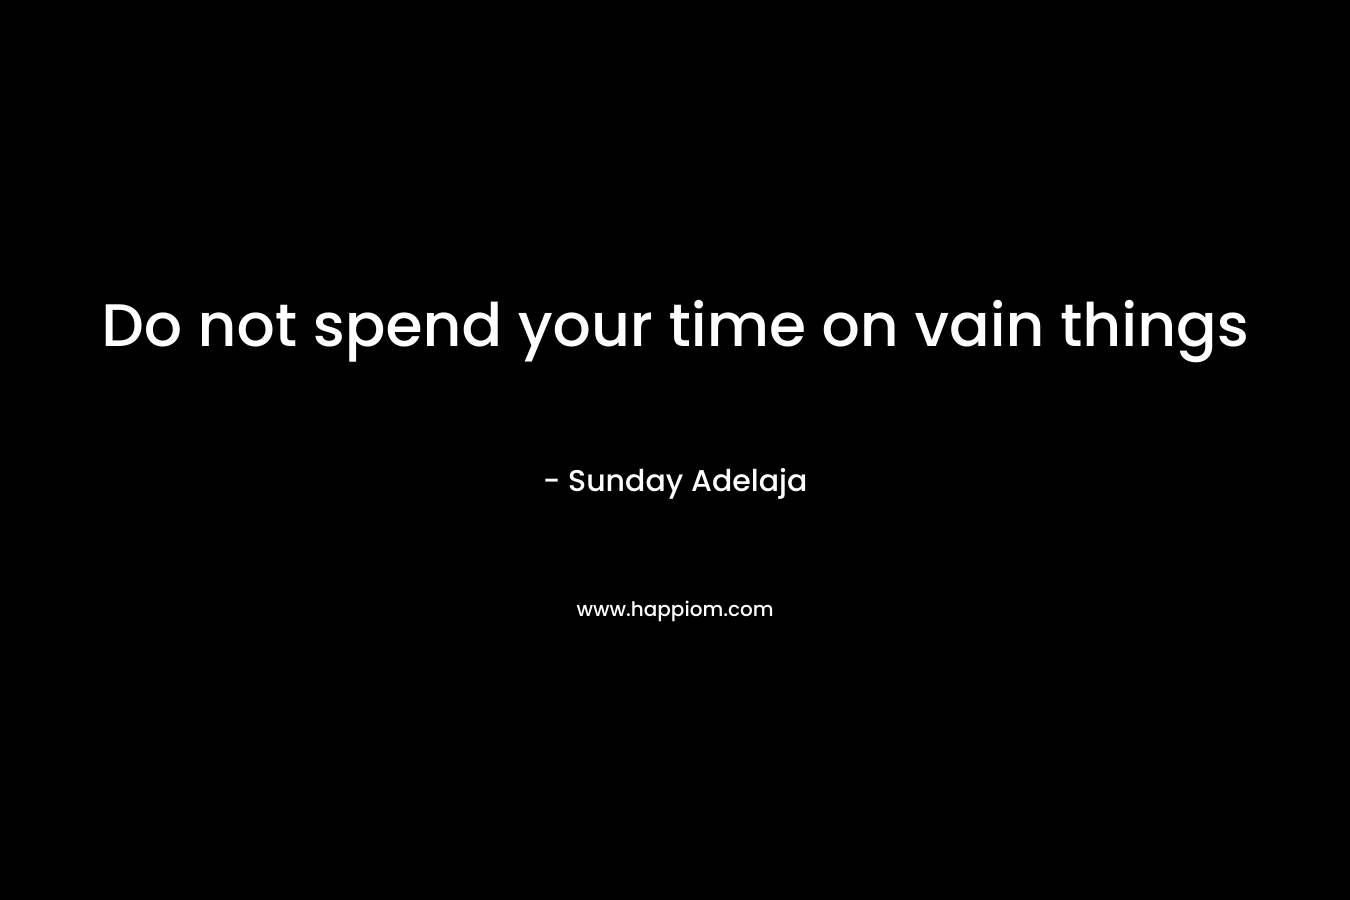 Do not spend your time on vain things